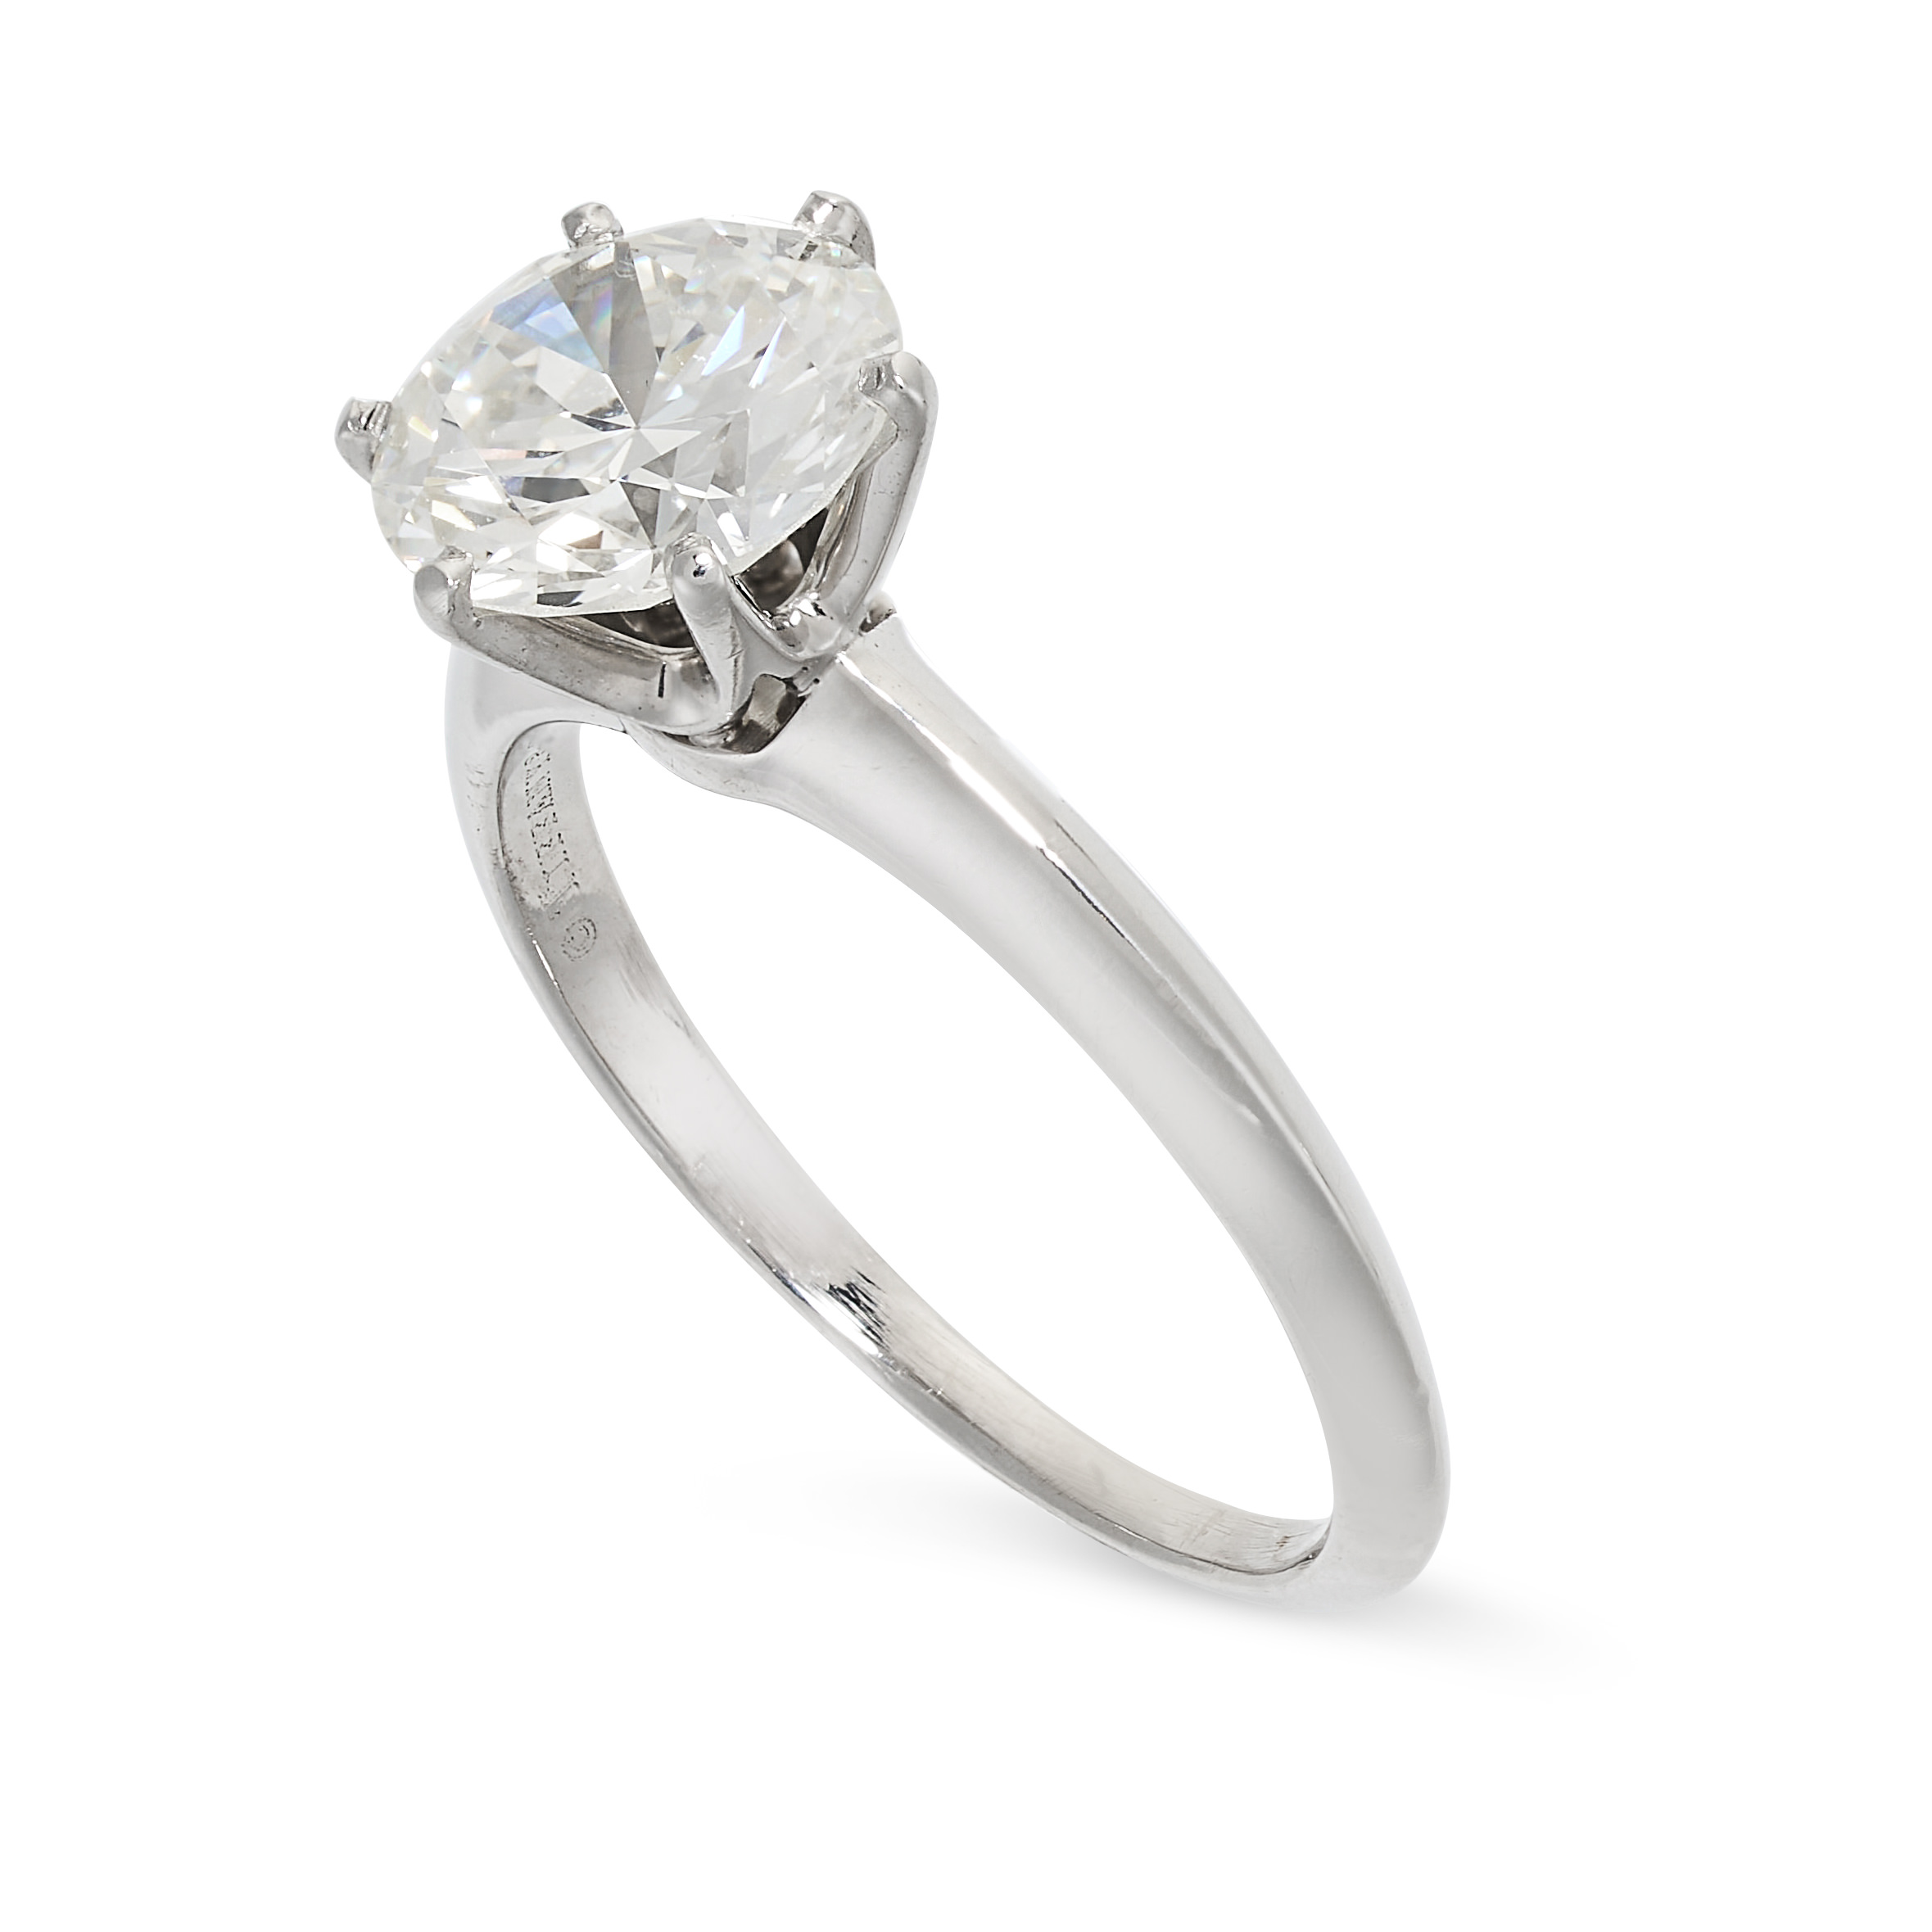 TIFFANY & CO, A SOLITAIRE DIAMOND ENGAGEMENT RING in platinum, set with a round brilliant cut - Image 2 of 2